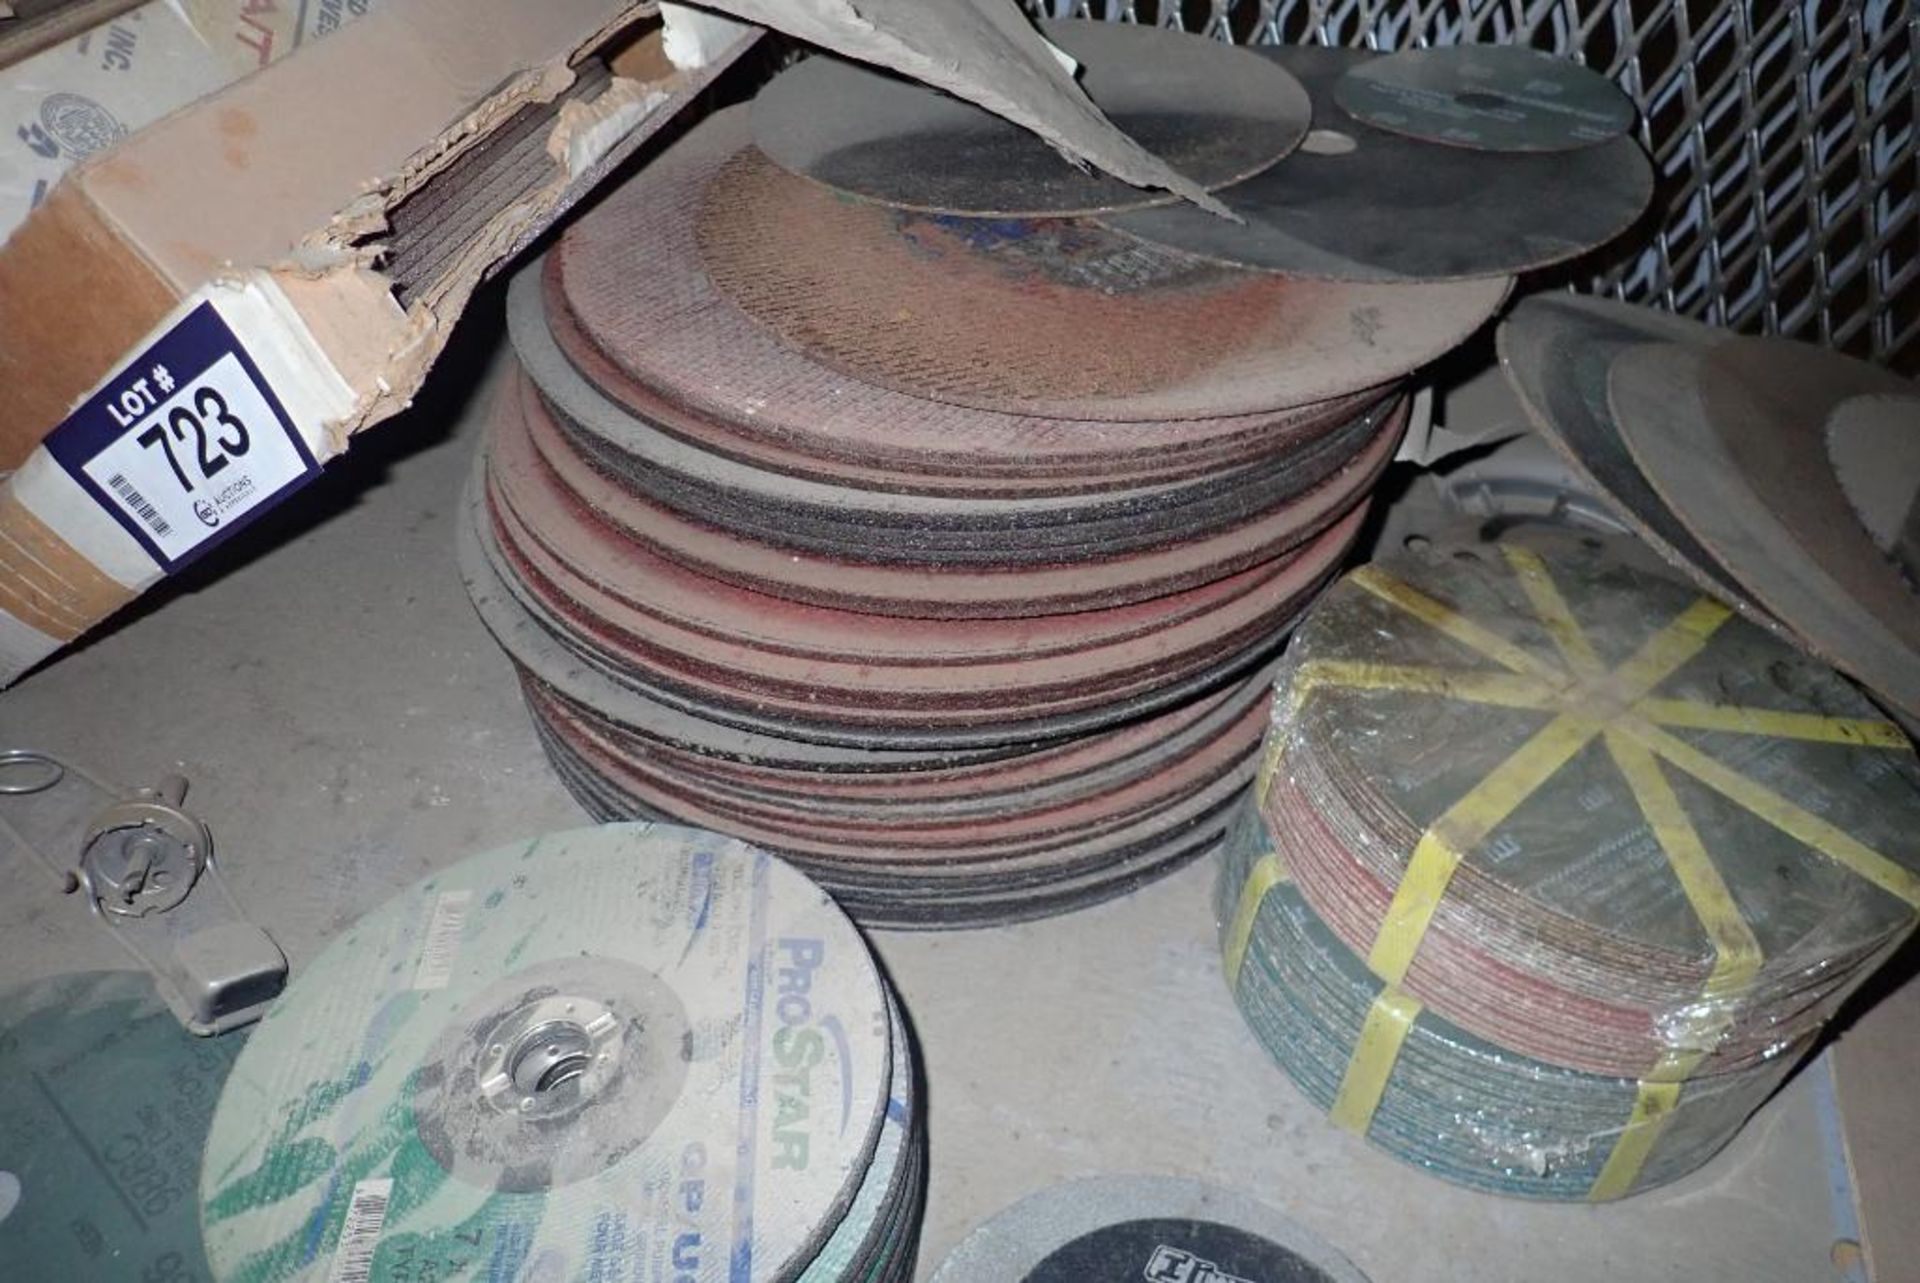 Lot of Asst. 7", 12" and 14" Grinding Wheels and Discs, etc. - Image 4 of 5